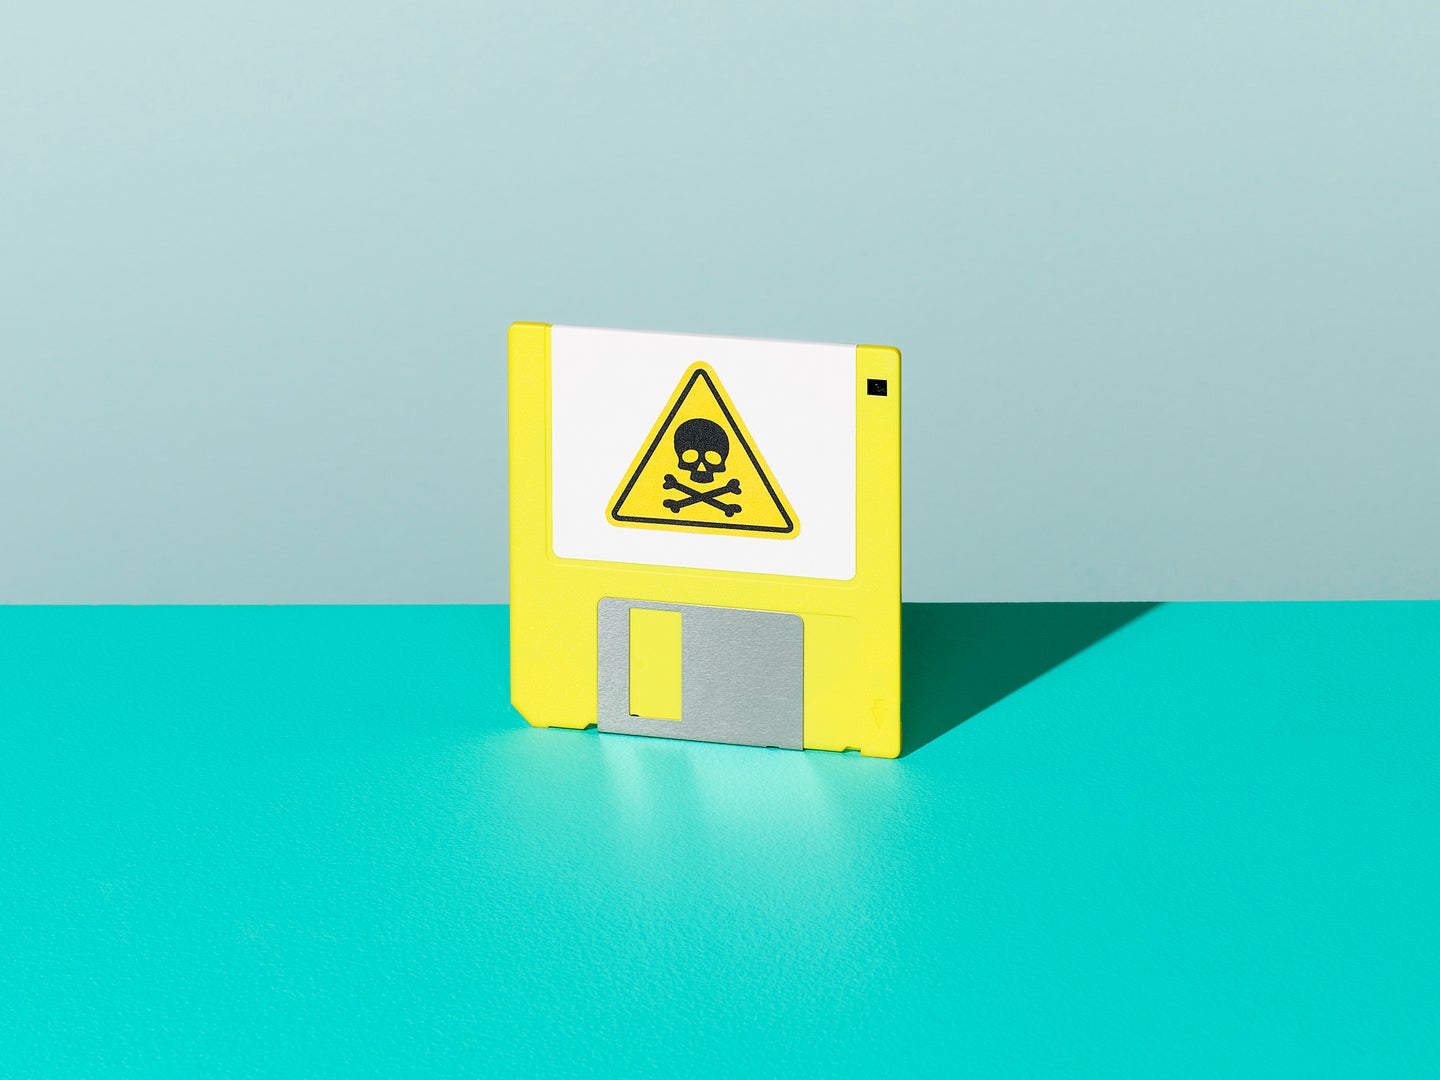 A yellow floppy disk with a poison symbol on it, standing upright on a teal surface.